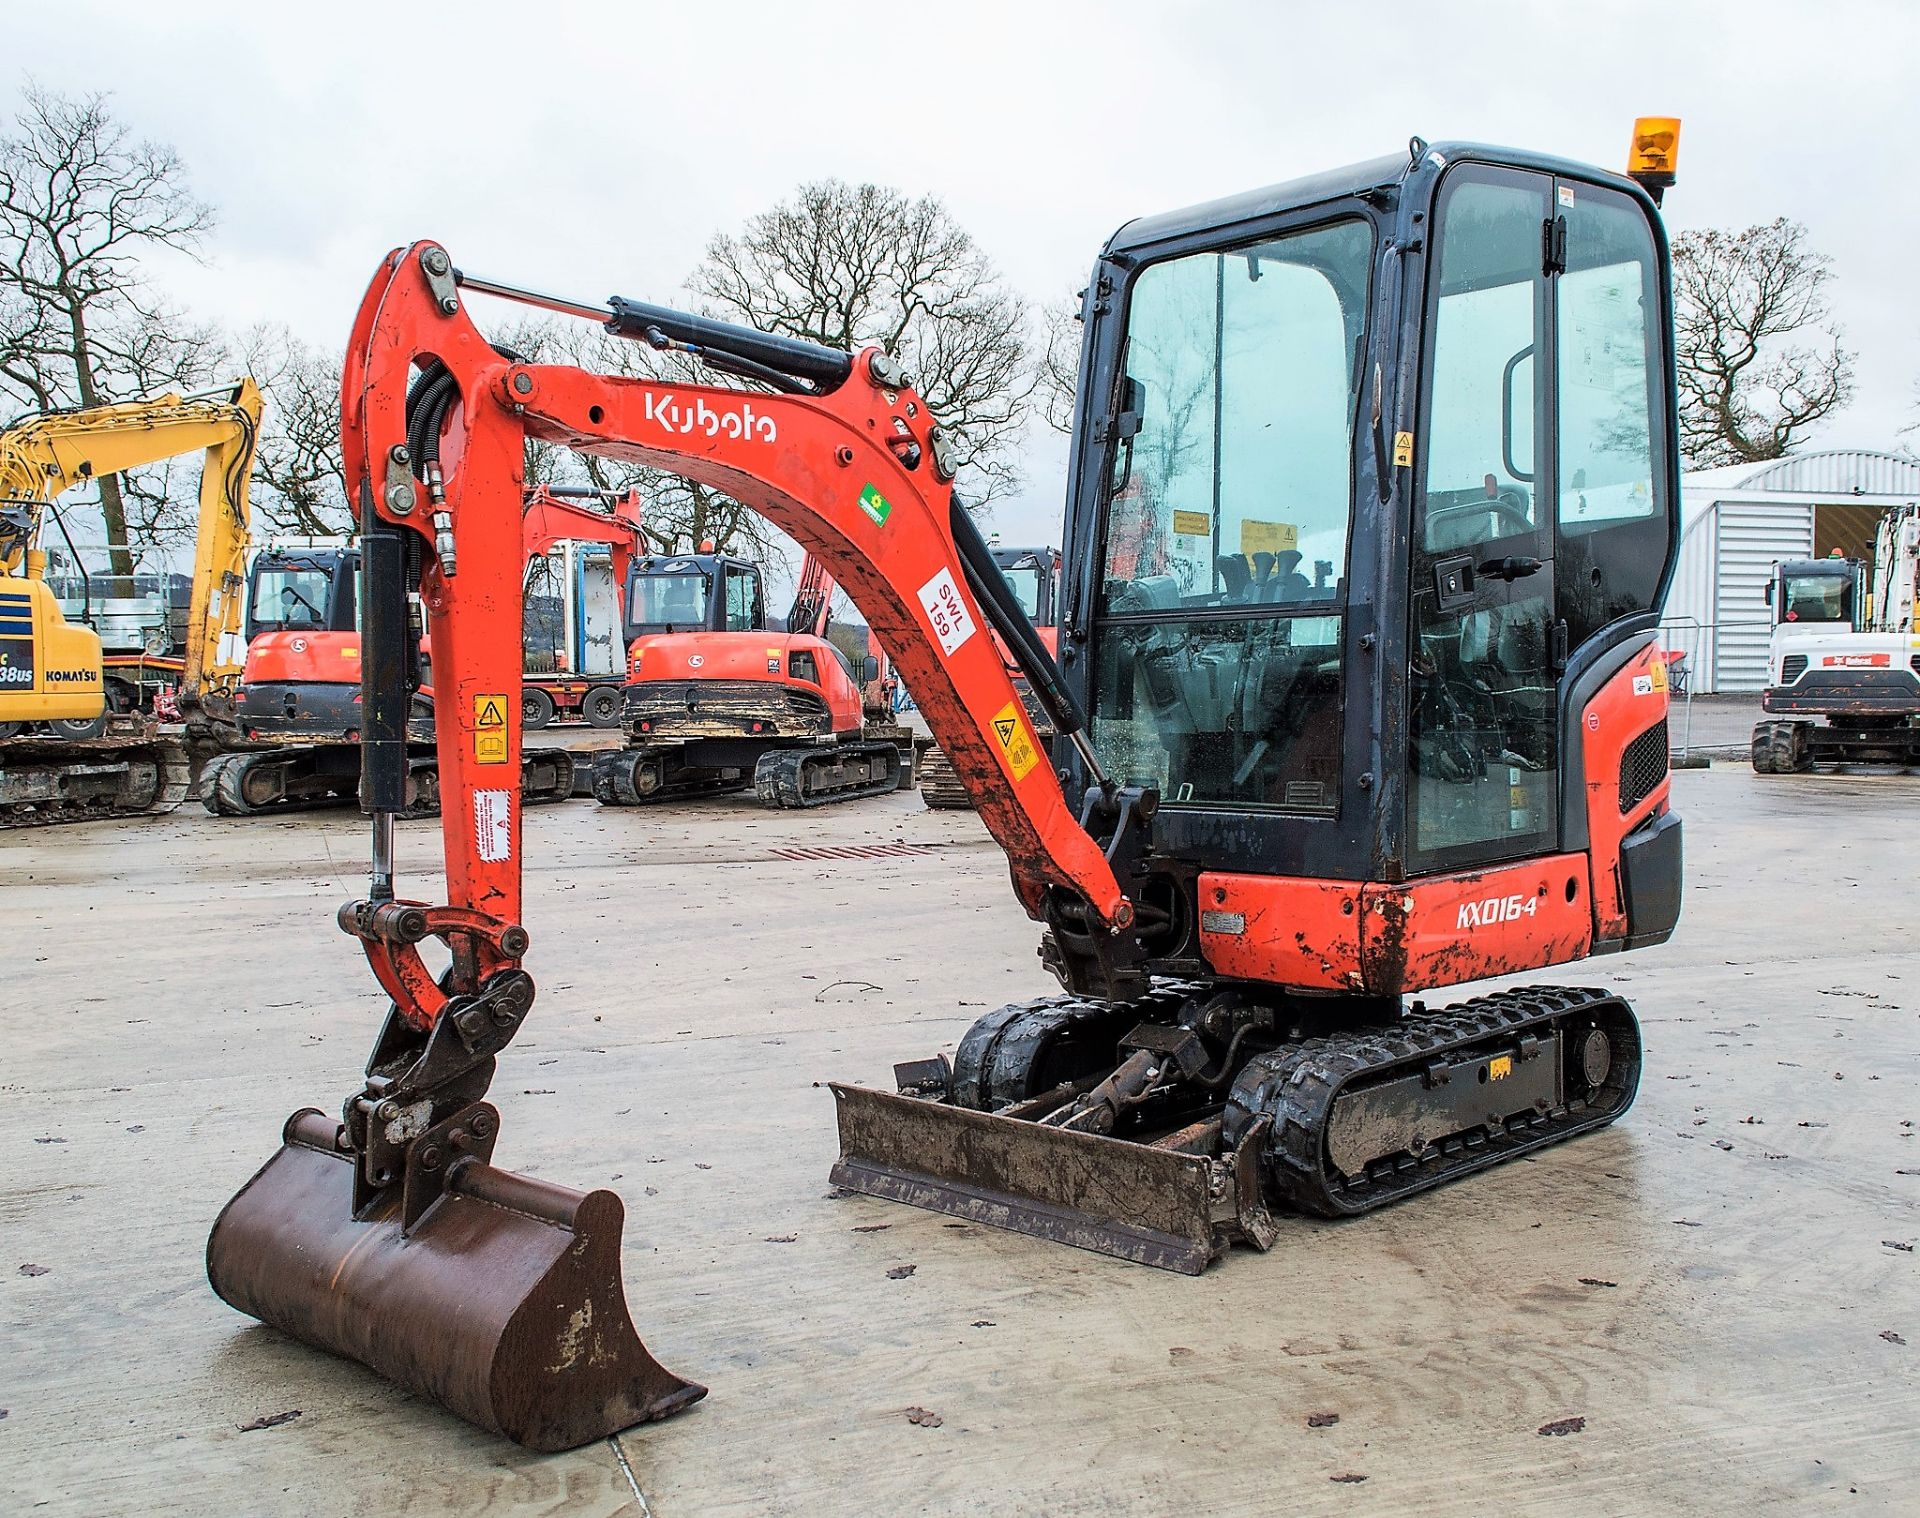 Kubota KX016-4 1.5 tonne rubber tracked excavator Year: 2014 S/N: 57529 Recorded Hours: 2638